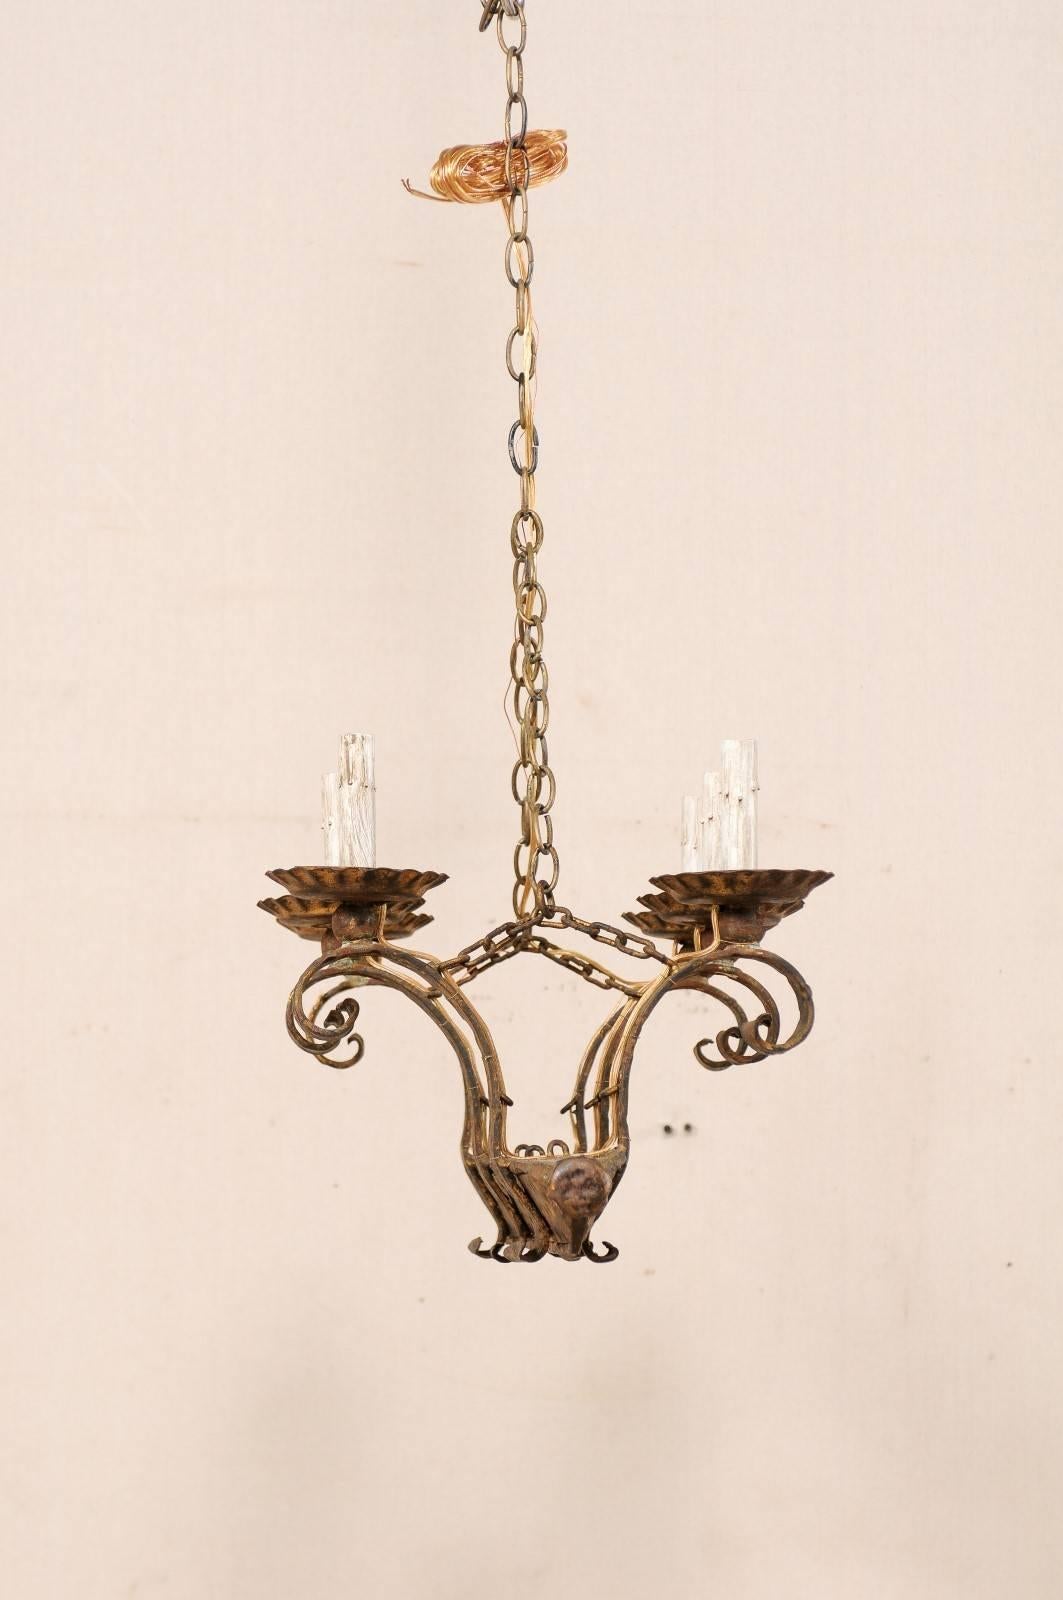 A vintage French six-light chandelier. This French chandelier from the mid-20th century of forged iron has an oblong lower beam which gives rise to six arms, three at each long side, giving the chandelier a distinctive v-shaped side profile. Each